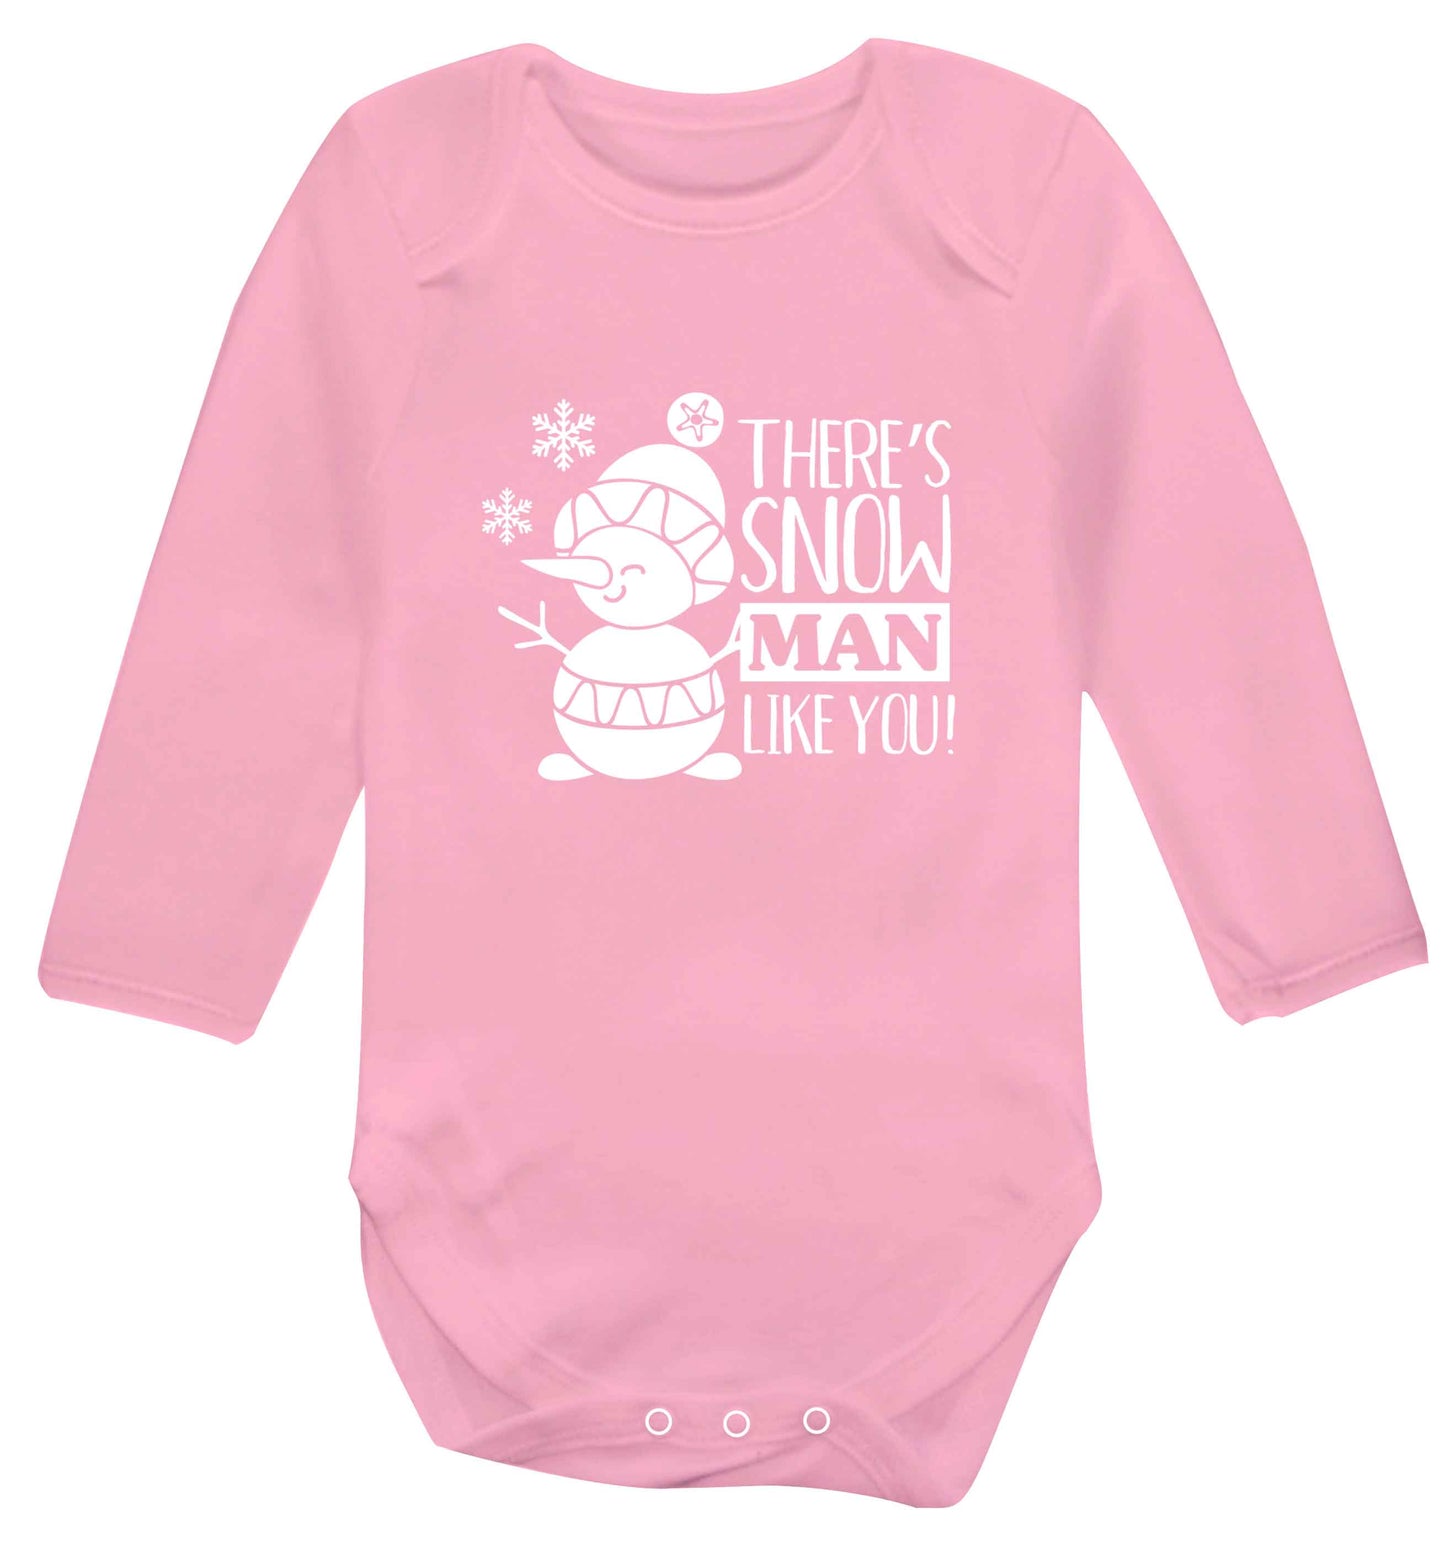 There's snow man like you baby vest long sleeved pale pink 6-12 months